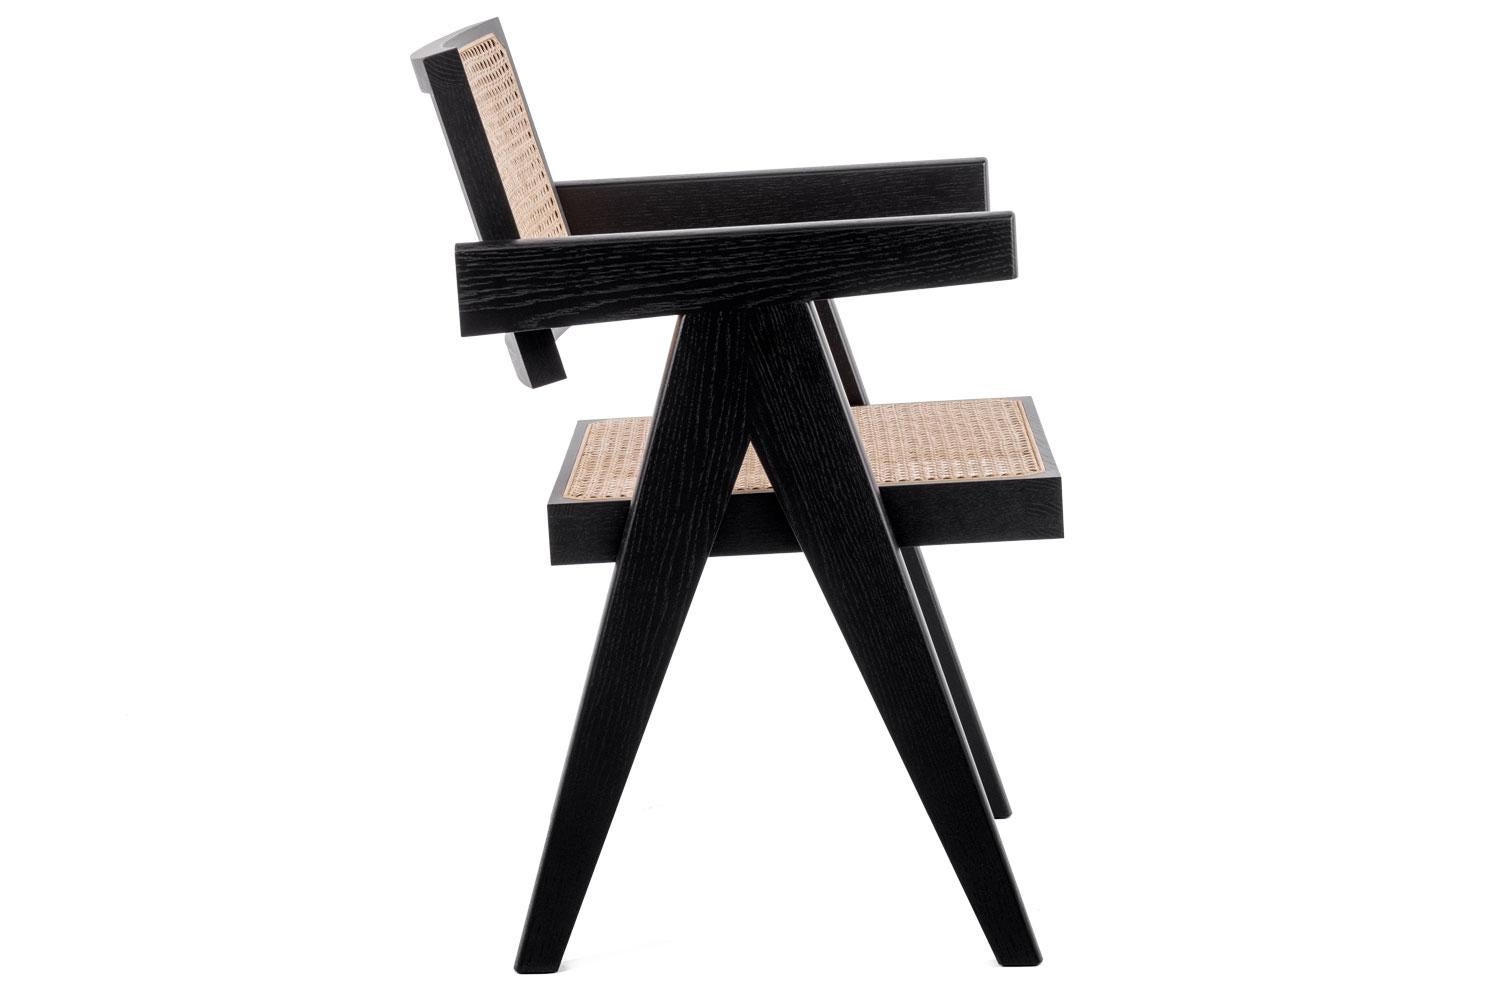 Capitol complex office chair by Cassina

This chair is one of the most recognizable in Chandigarh’s Capitol Complex, found throughout the offices of the Secretariat. The independent pieces, including the side bars in an inverted “V” supporting the